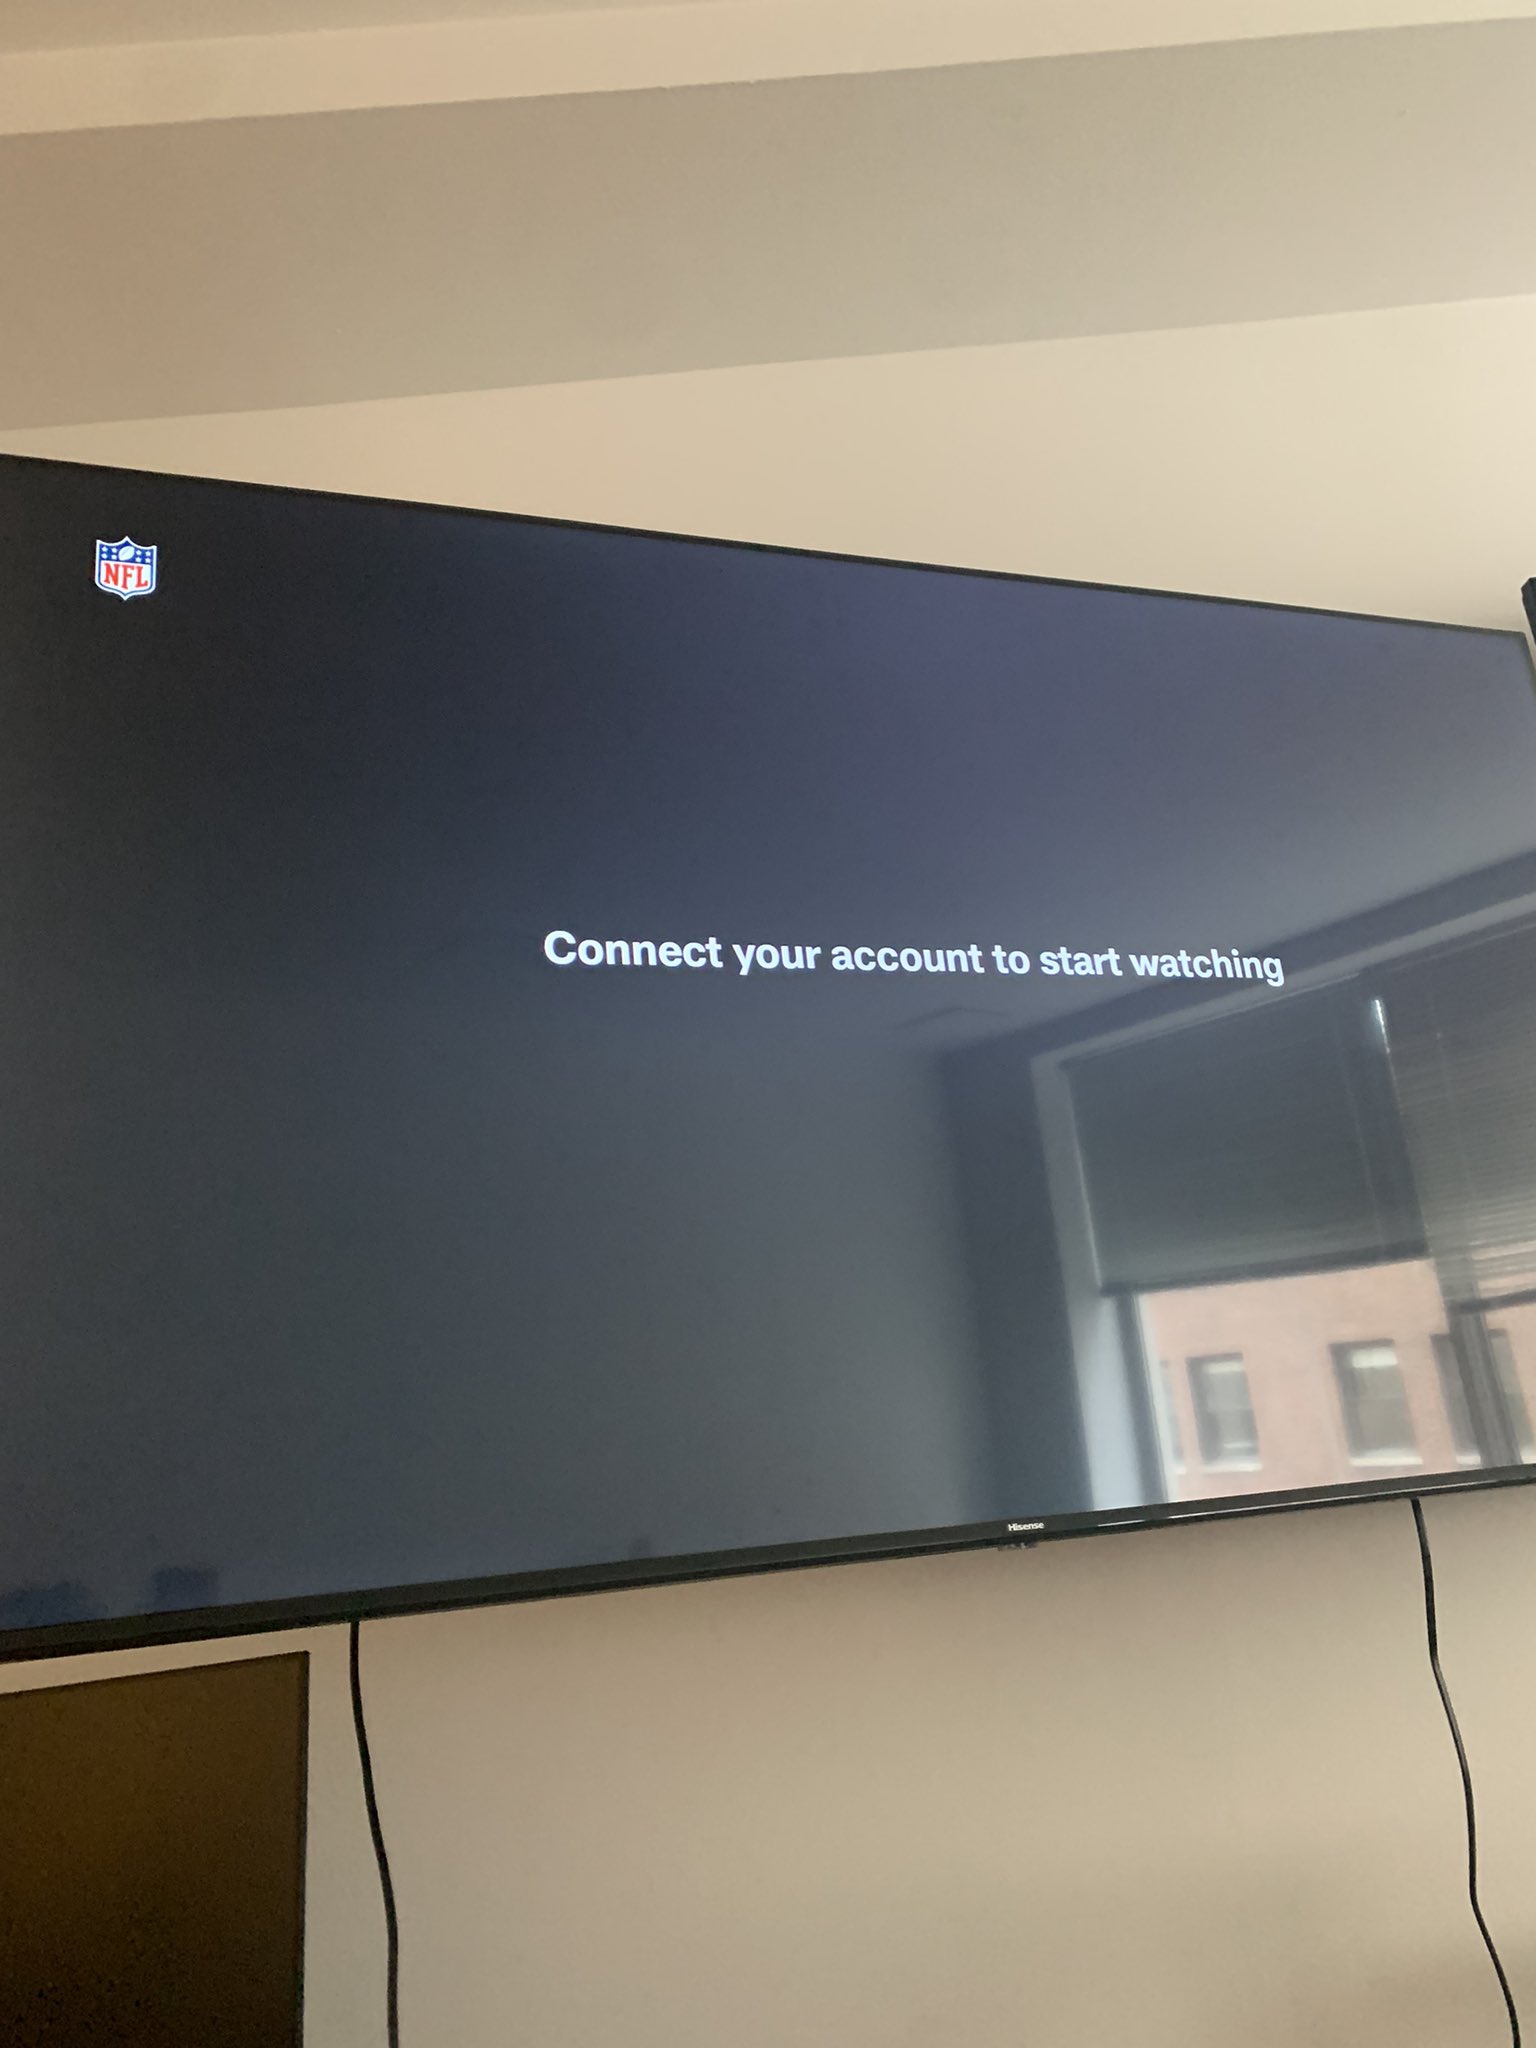 Verizon Support On Twitter Beasleymike17 Thank You For Letting Us Know You Are Able To Watch Redzone Via The Fios Tv App This Might Indicate An Issue With The Actual Nflapp And